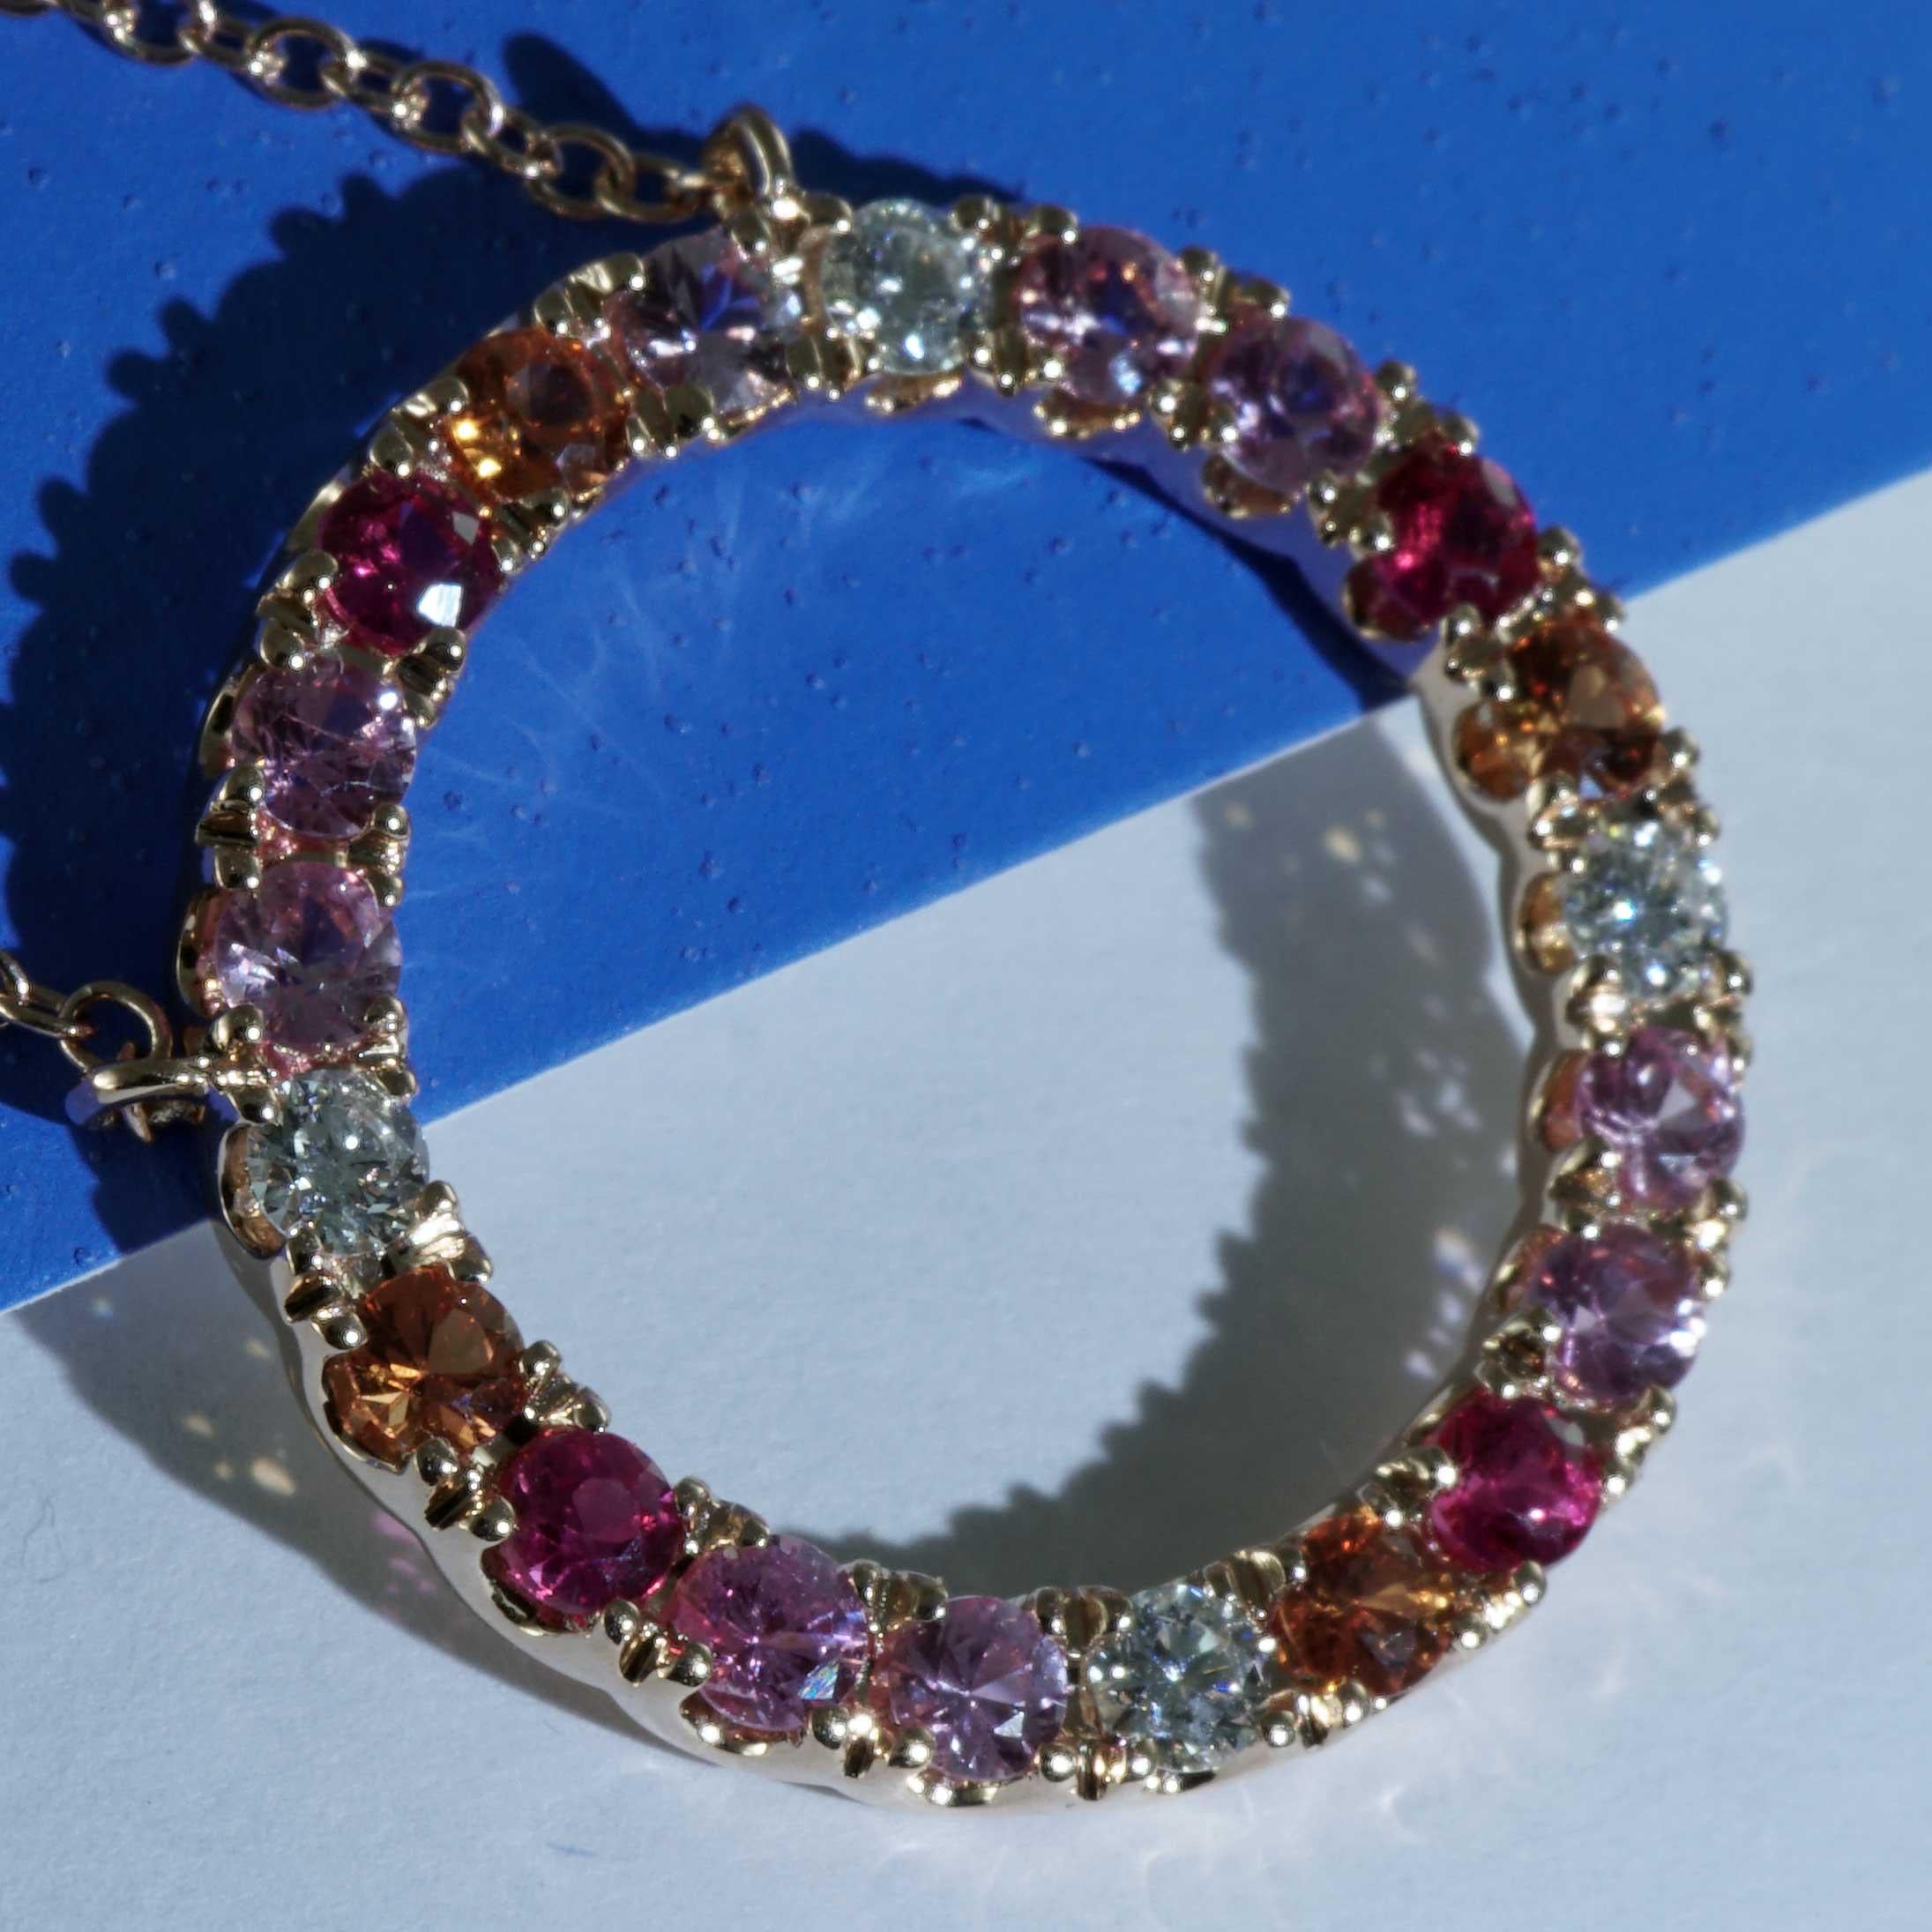 a sapphire necklace to amaze, a wonderful play of colors made of pink, pink and orange sapphires totaling approx. 1.21 ct with fine full-cut brilliant-cut diamonds totaling approx. 0.26 ct, TW (fine white) / VS (very small inclusions) combined, set